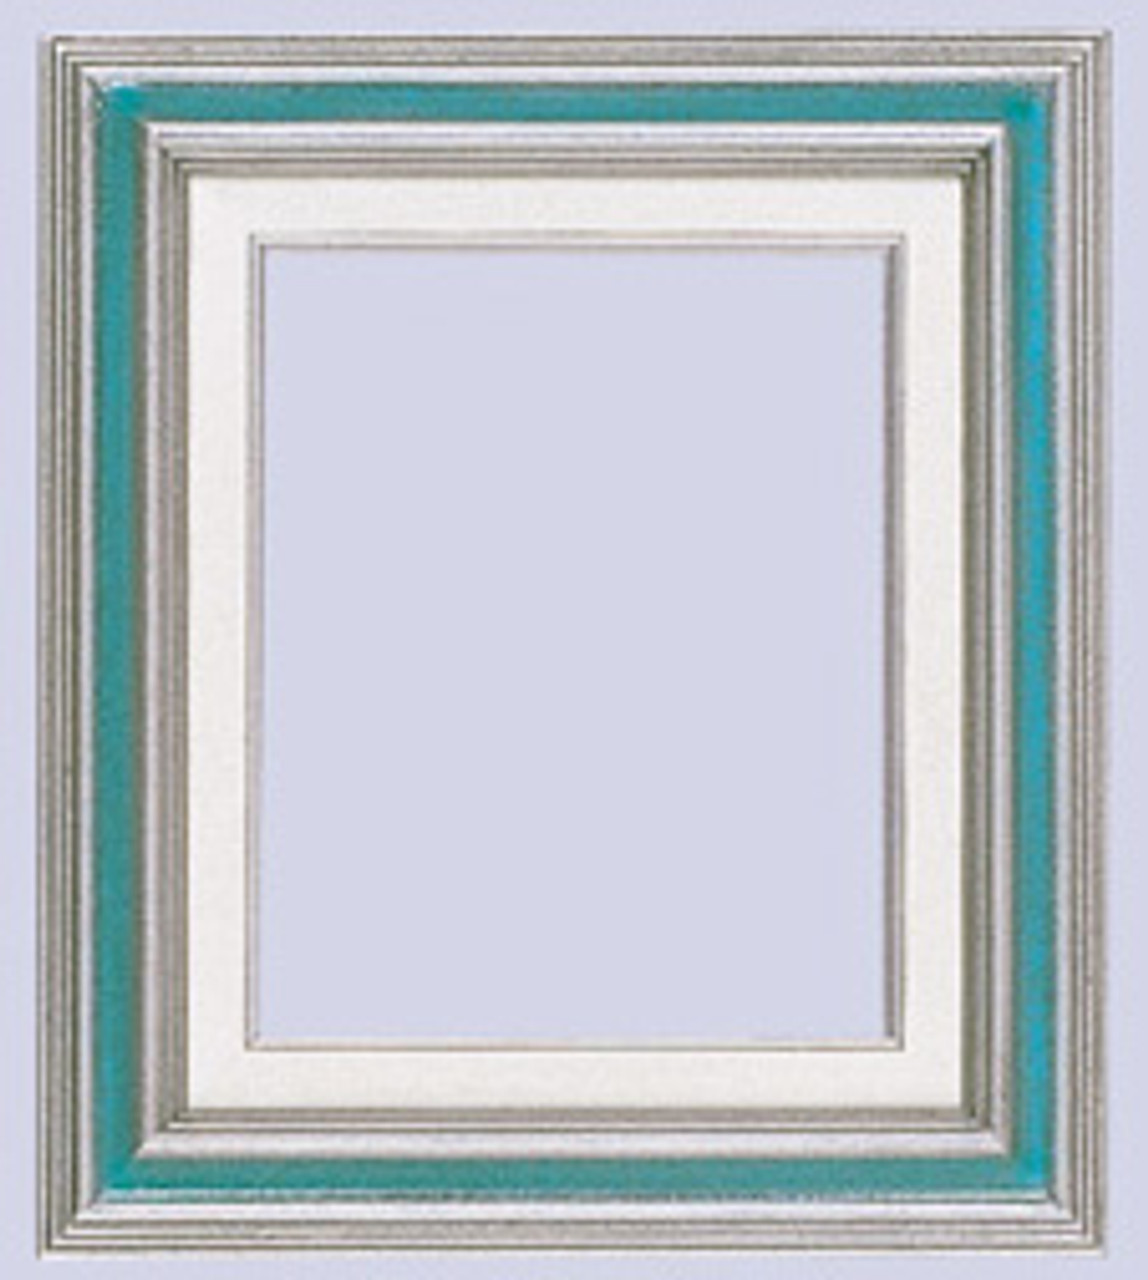 3 Inch Econo Wood Frames With Linen Liners: 12X17*